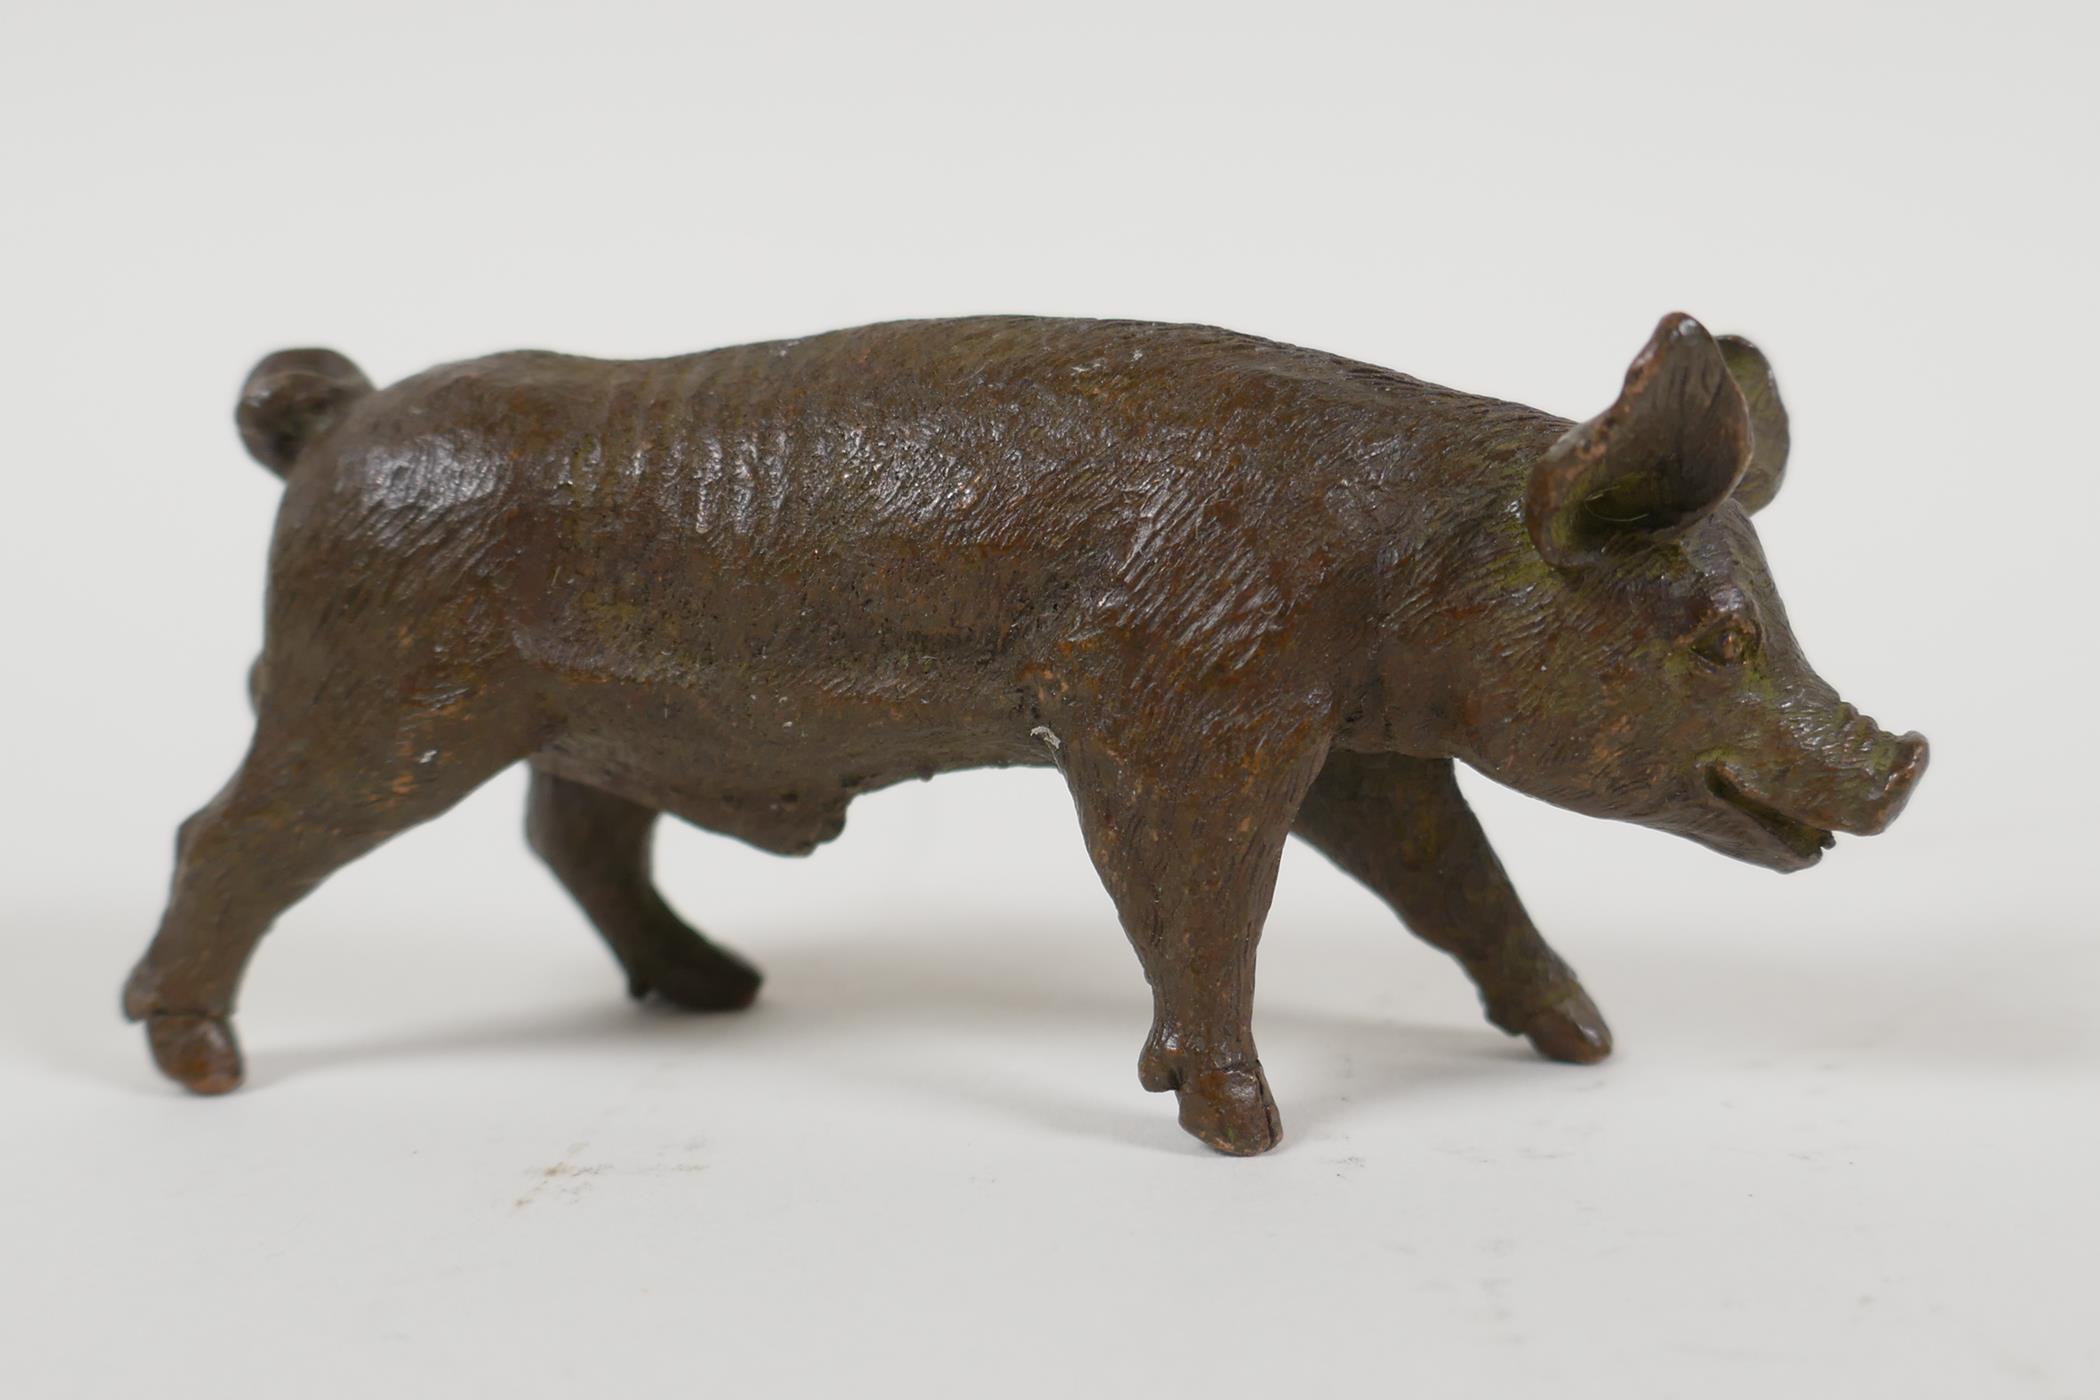 A Japanese bronze okimono in the form of a pig, 3½" long